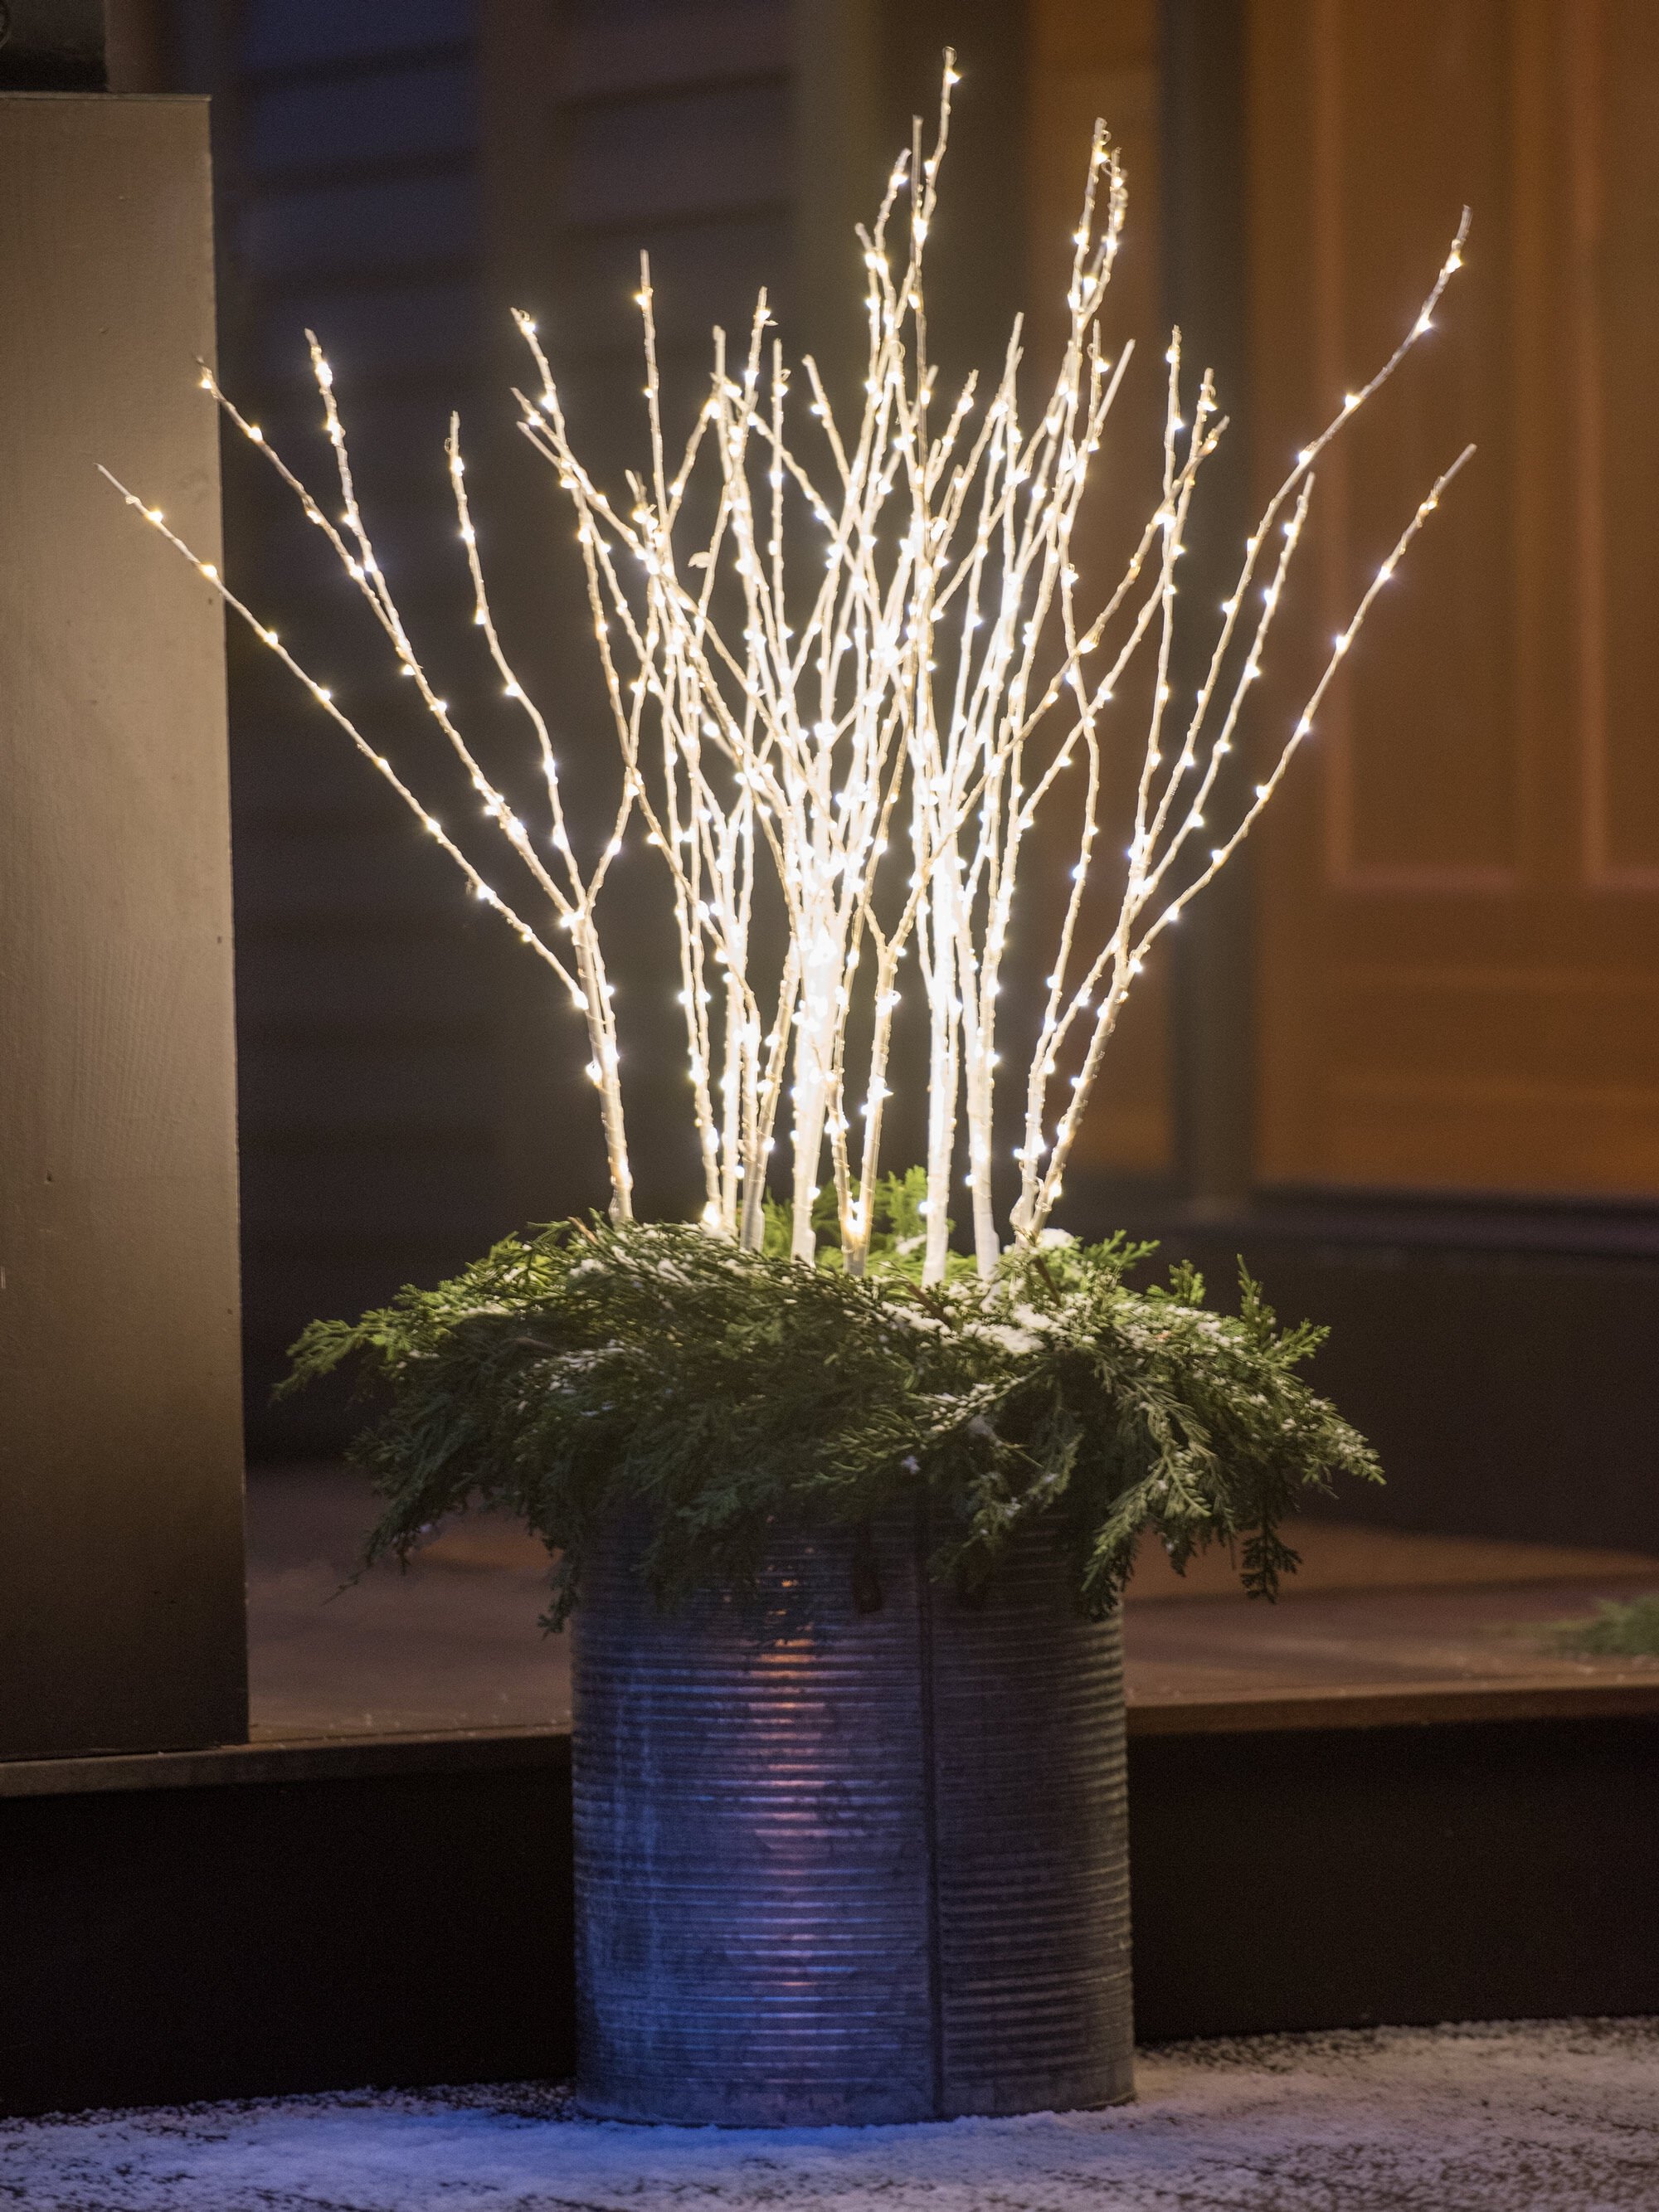 Birch LED Outdoor Branches - Lighted Sticks Decoration | Gardeners.com